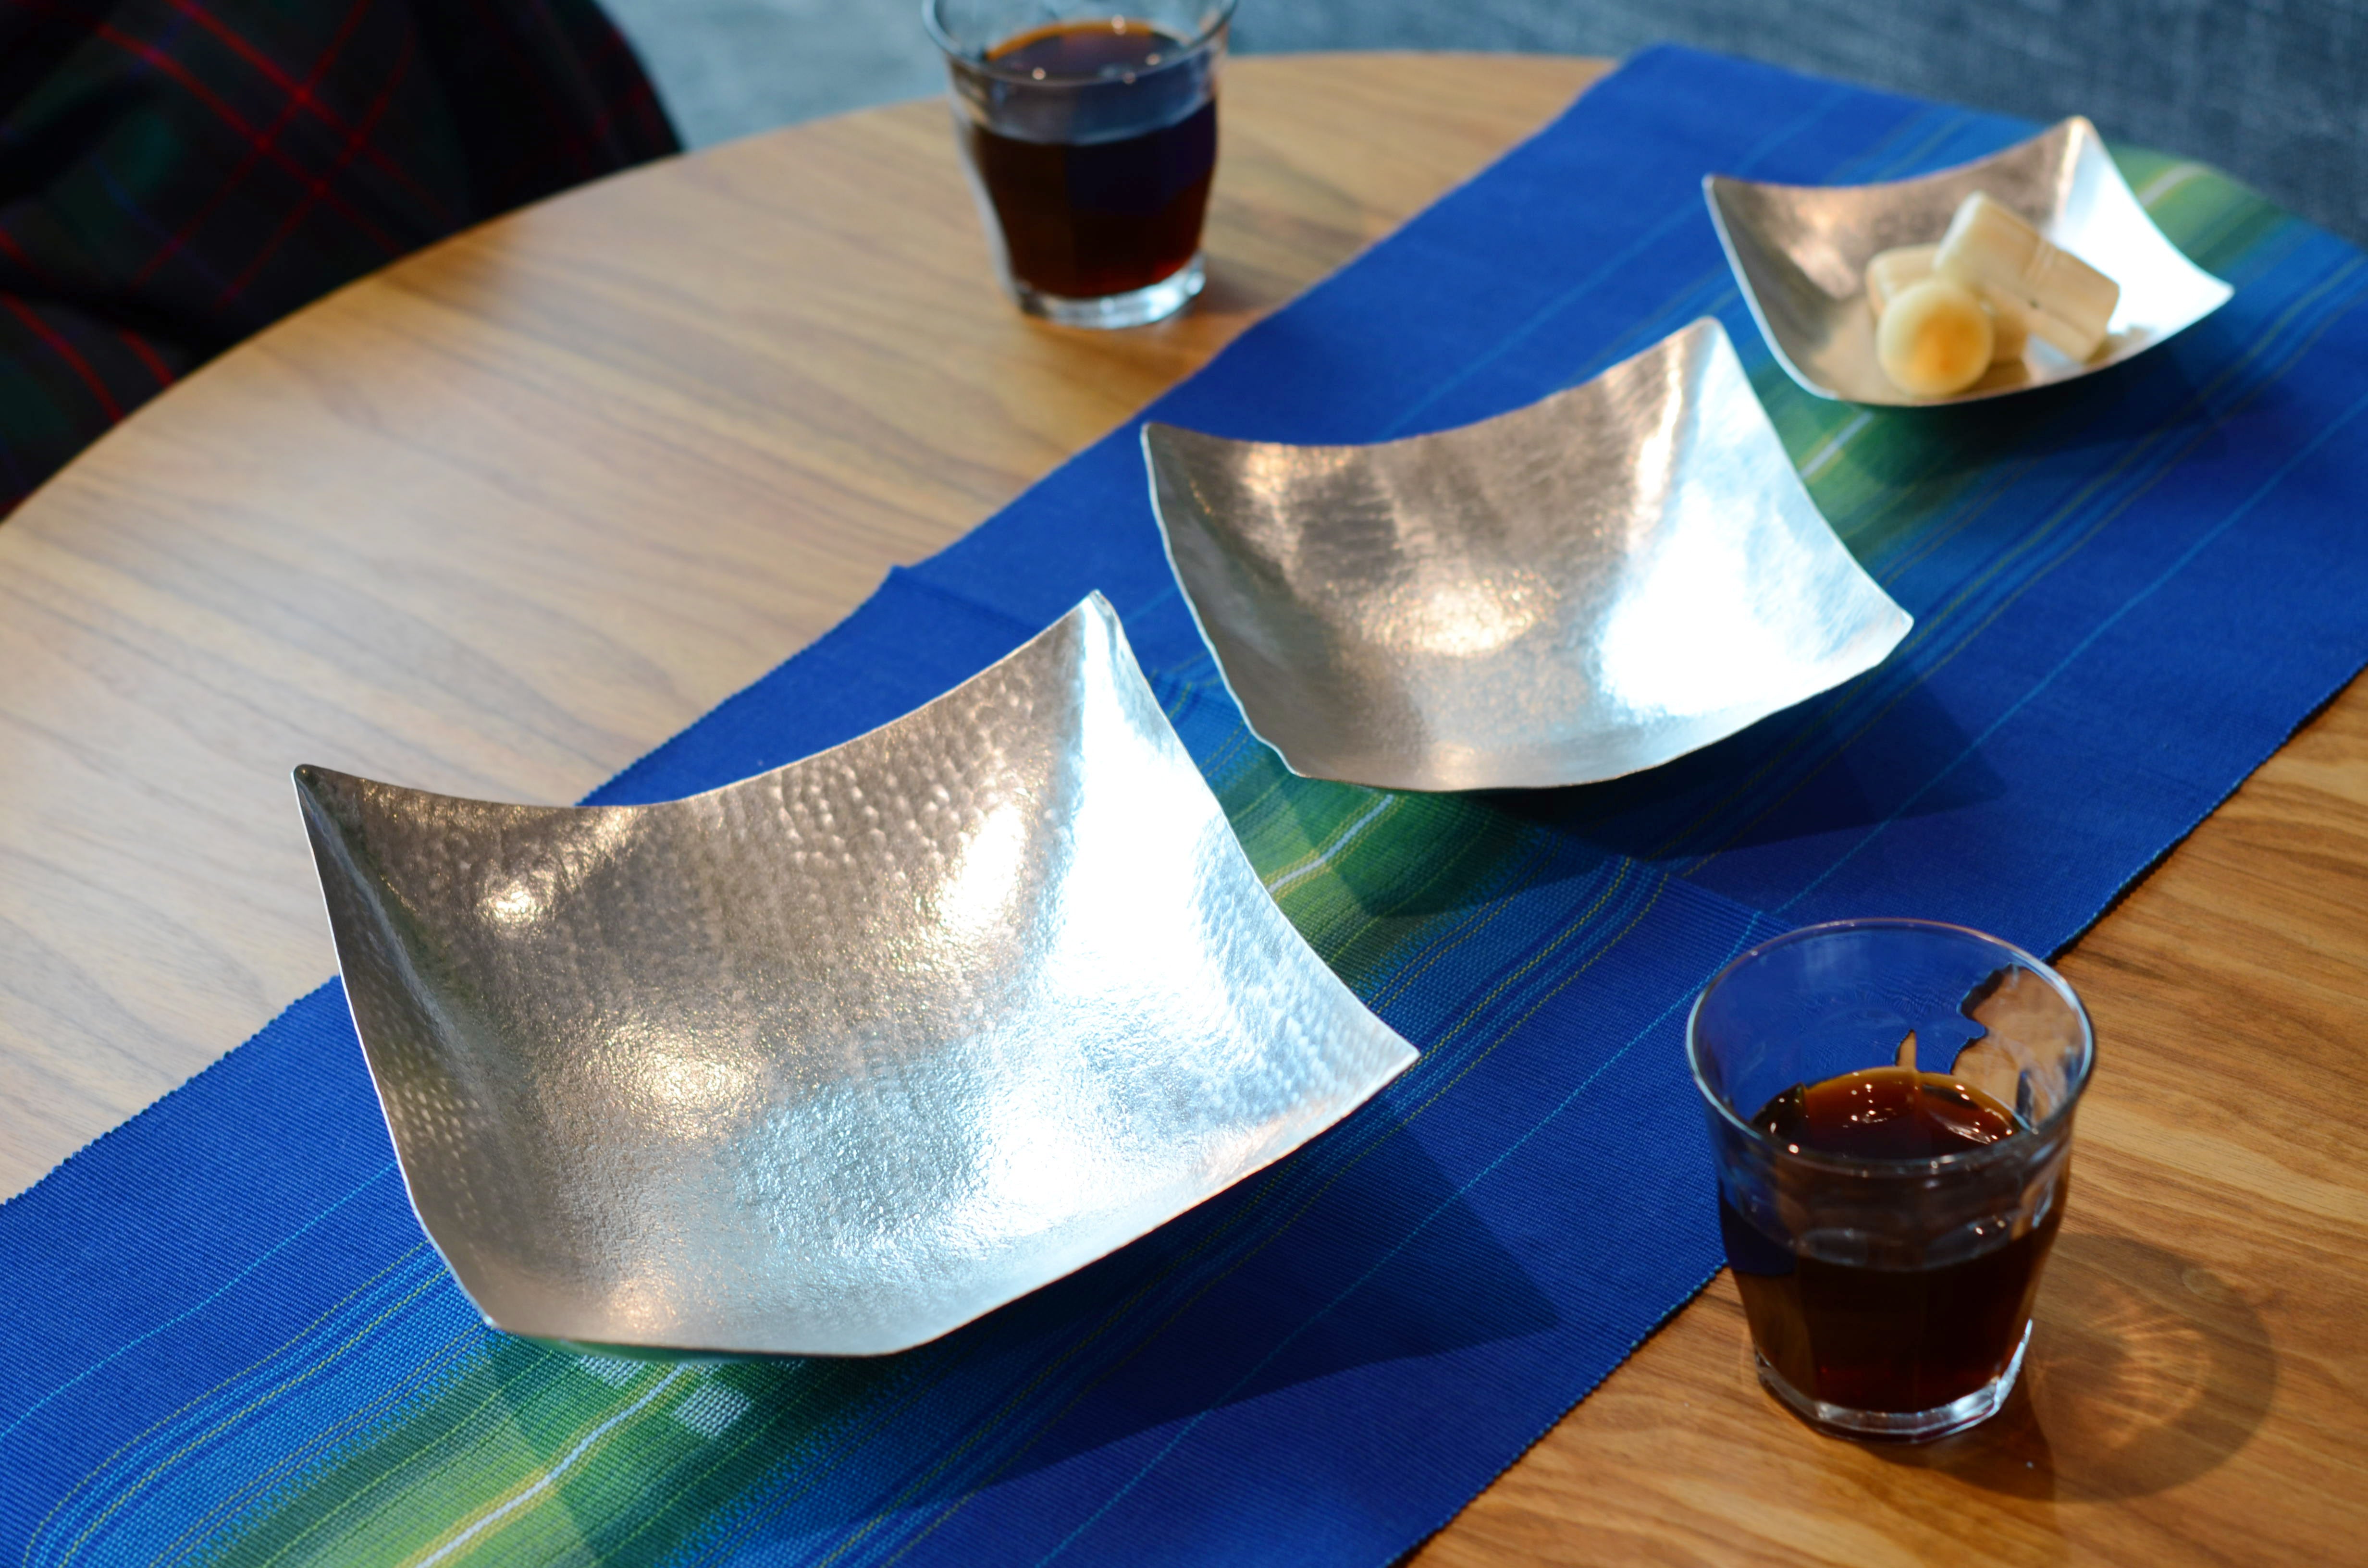 Bendable tin dishes